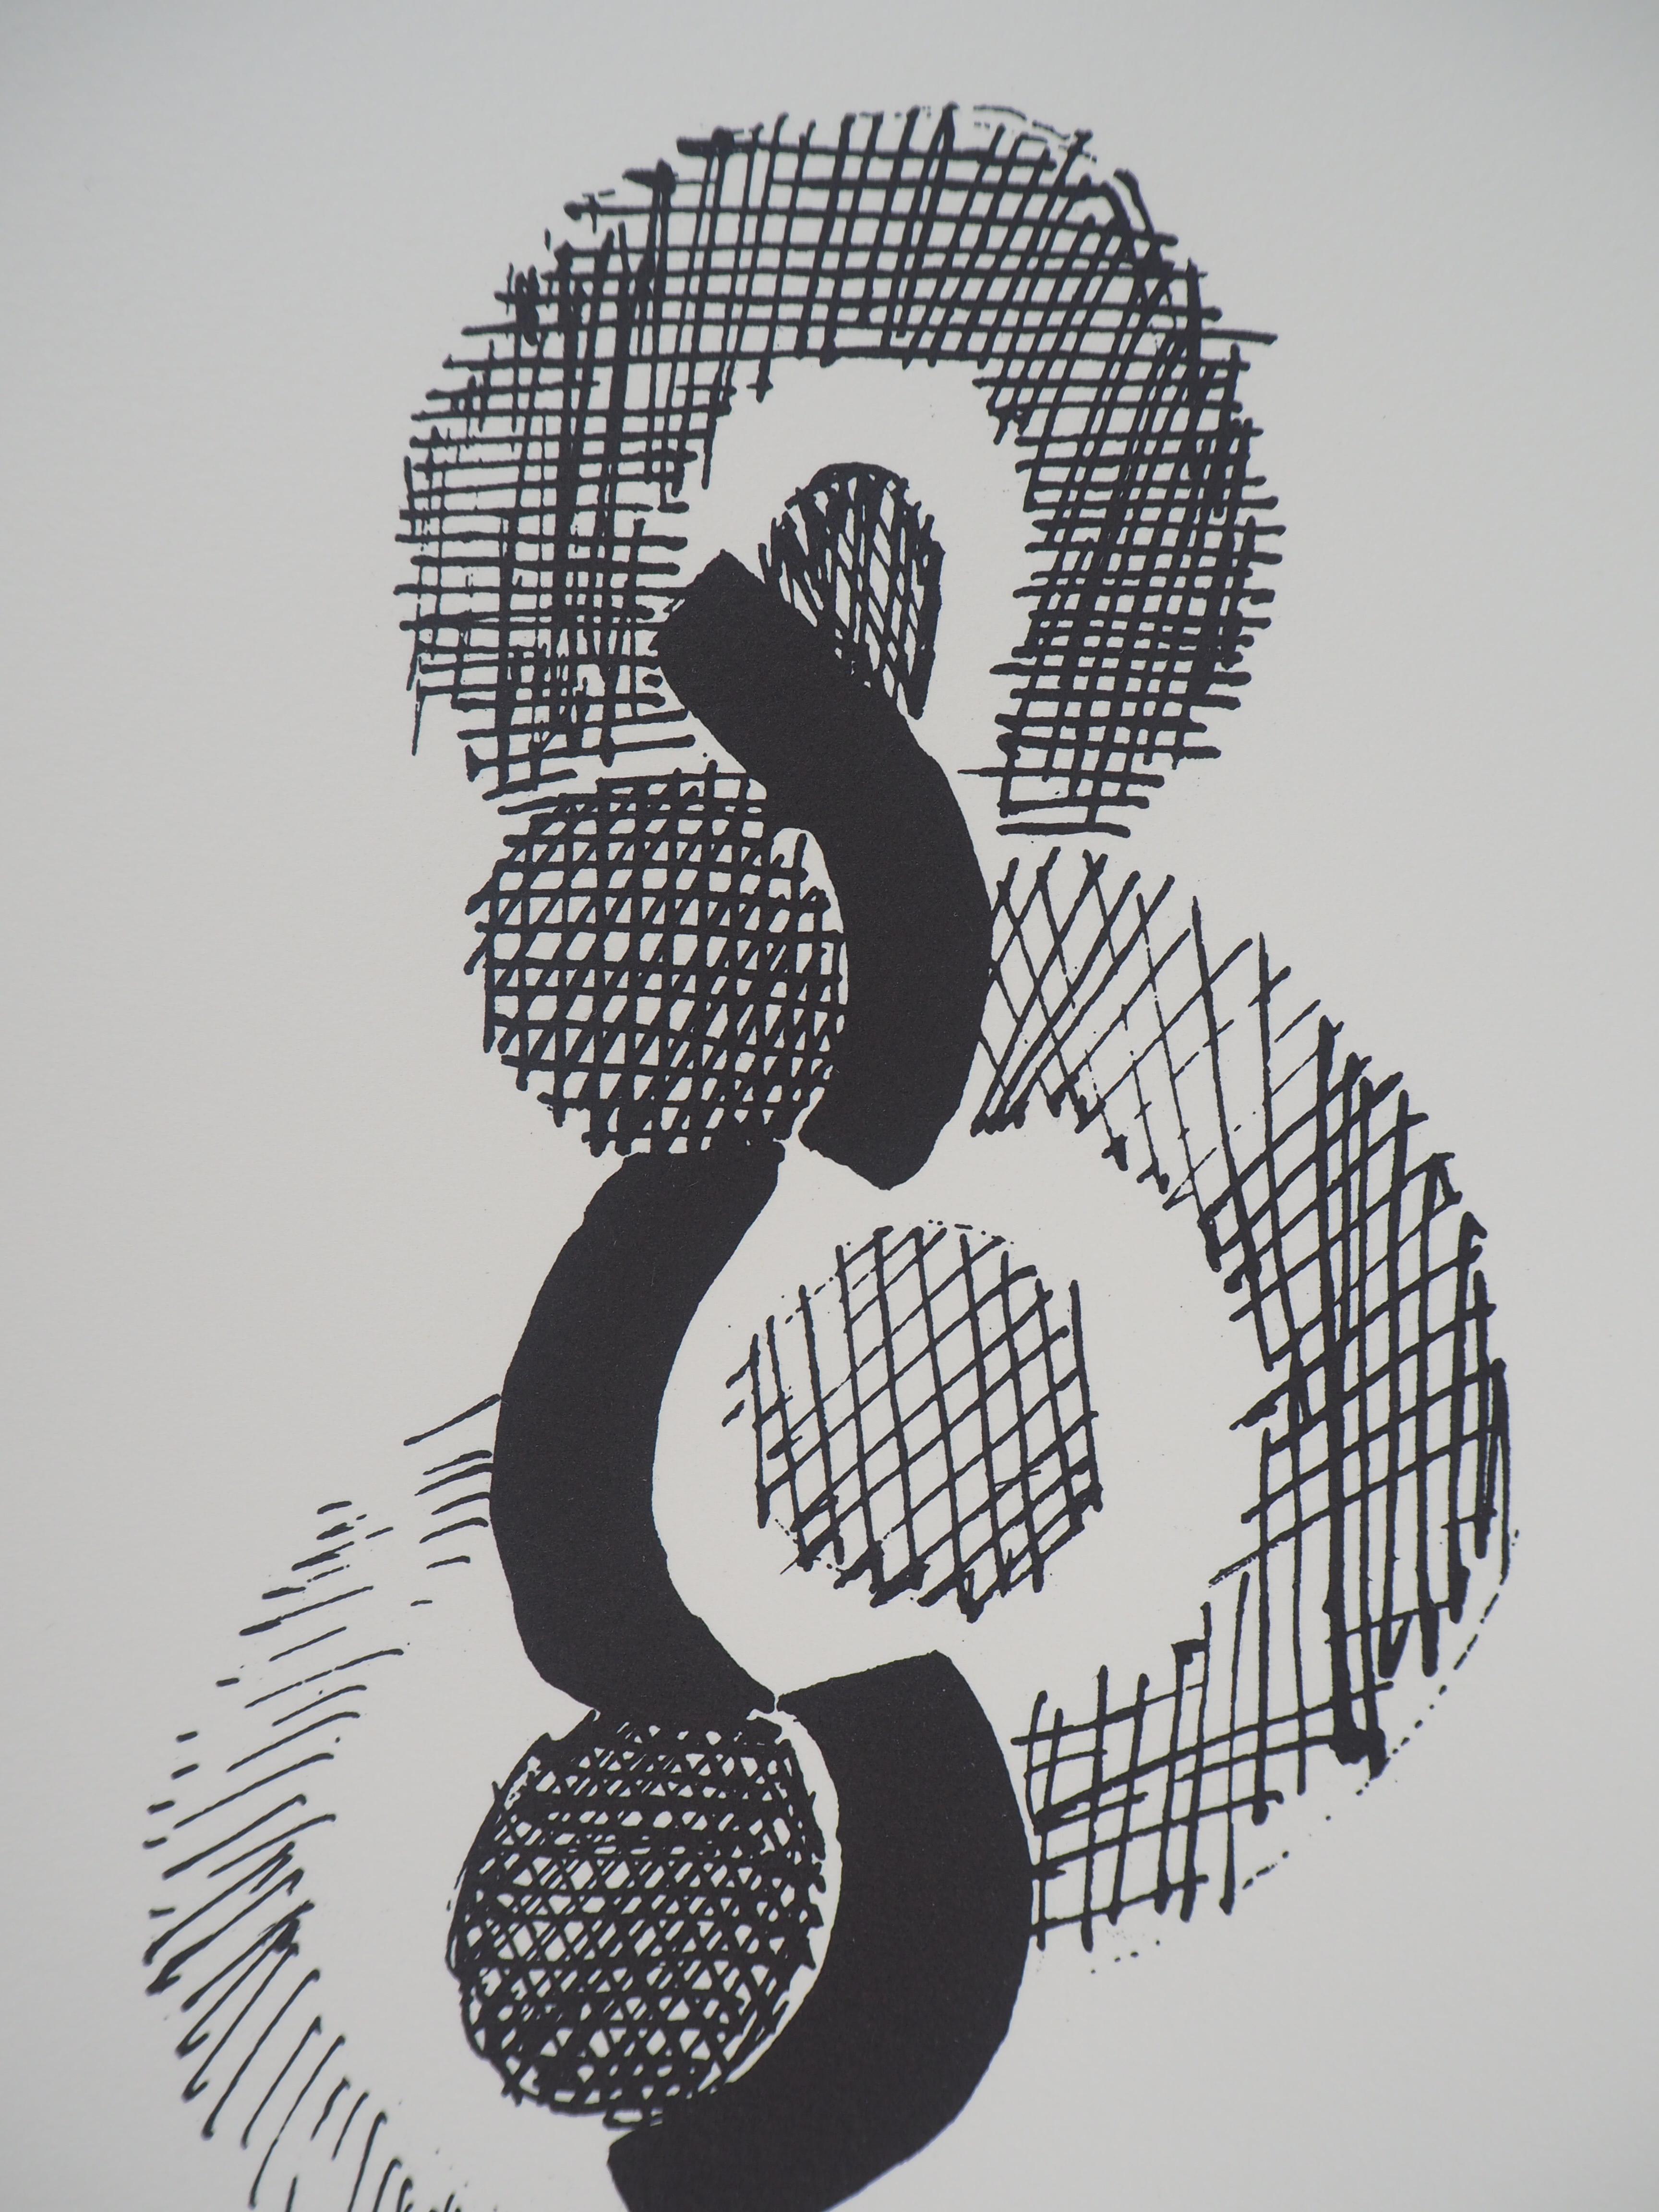  Dance, Endless Rythm - 1923 - Lithograph - Gray Abstract Print by Sonia Delaunay